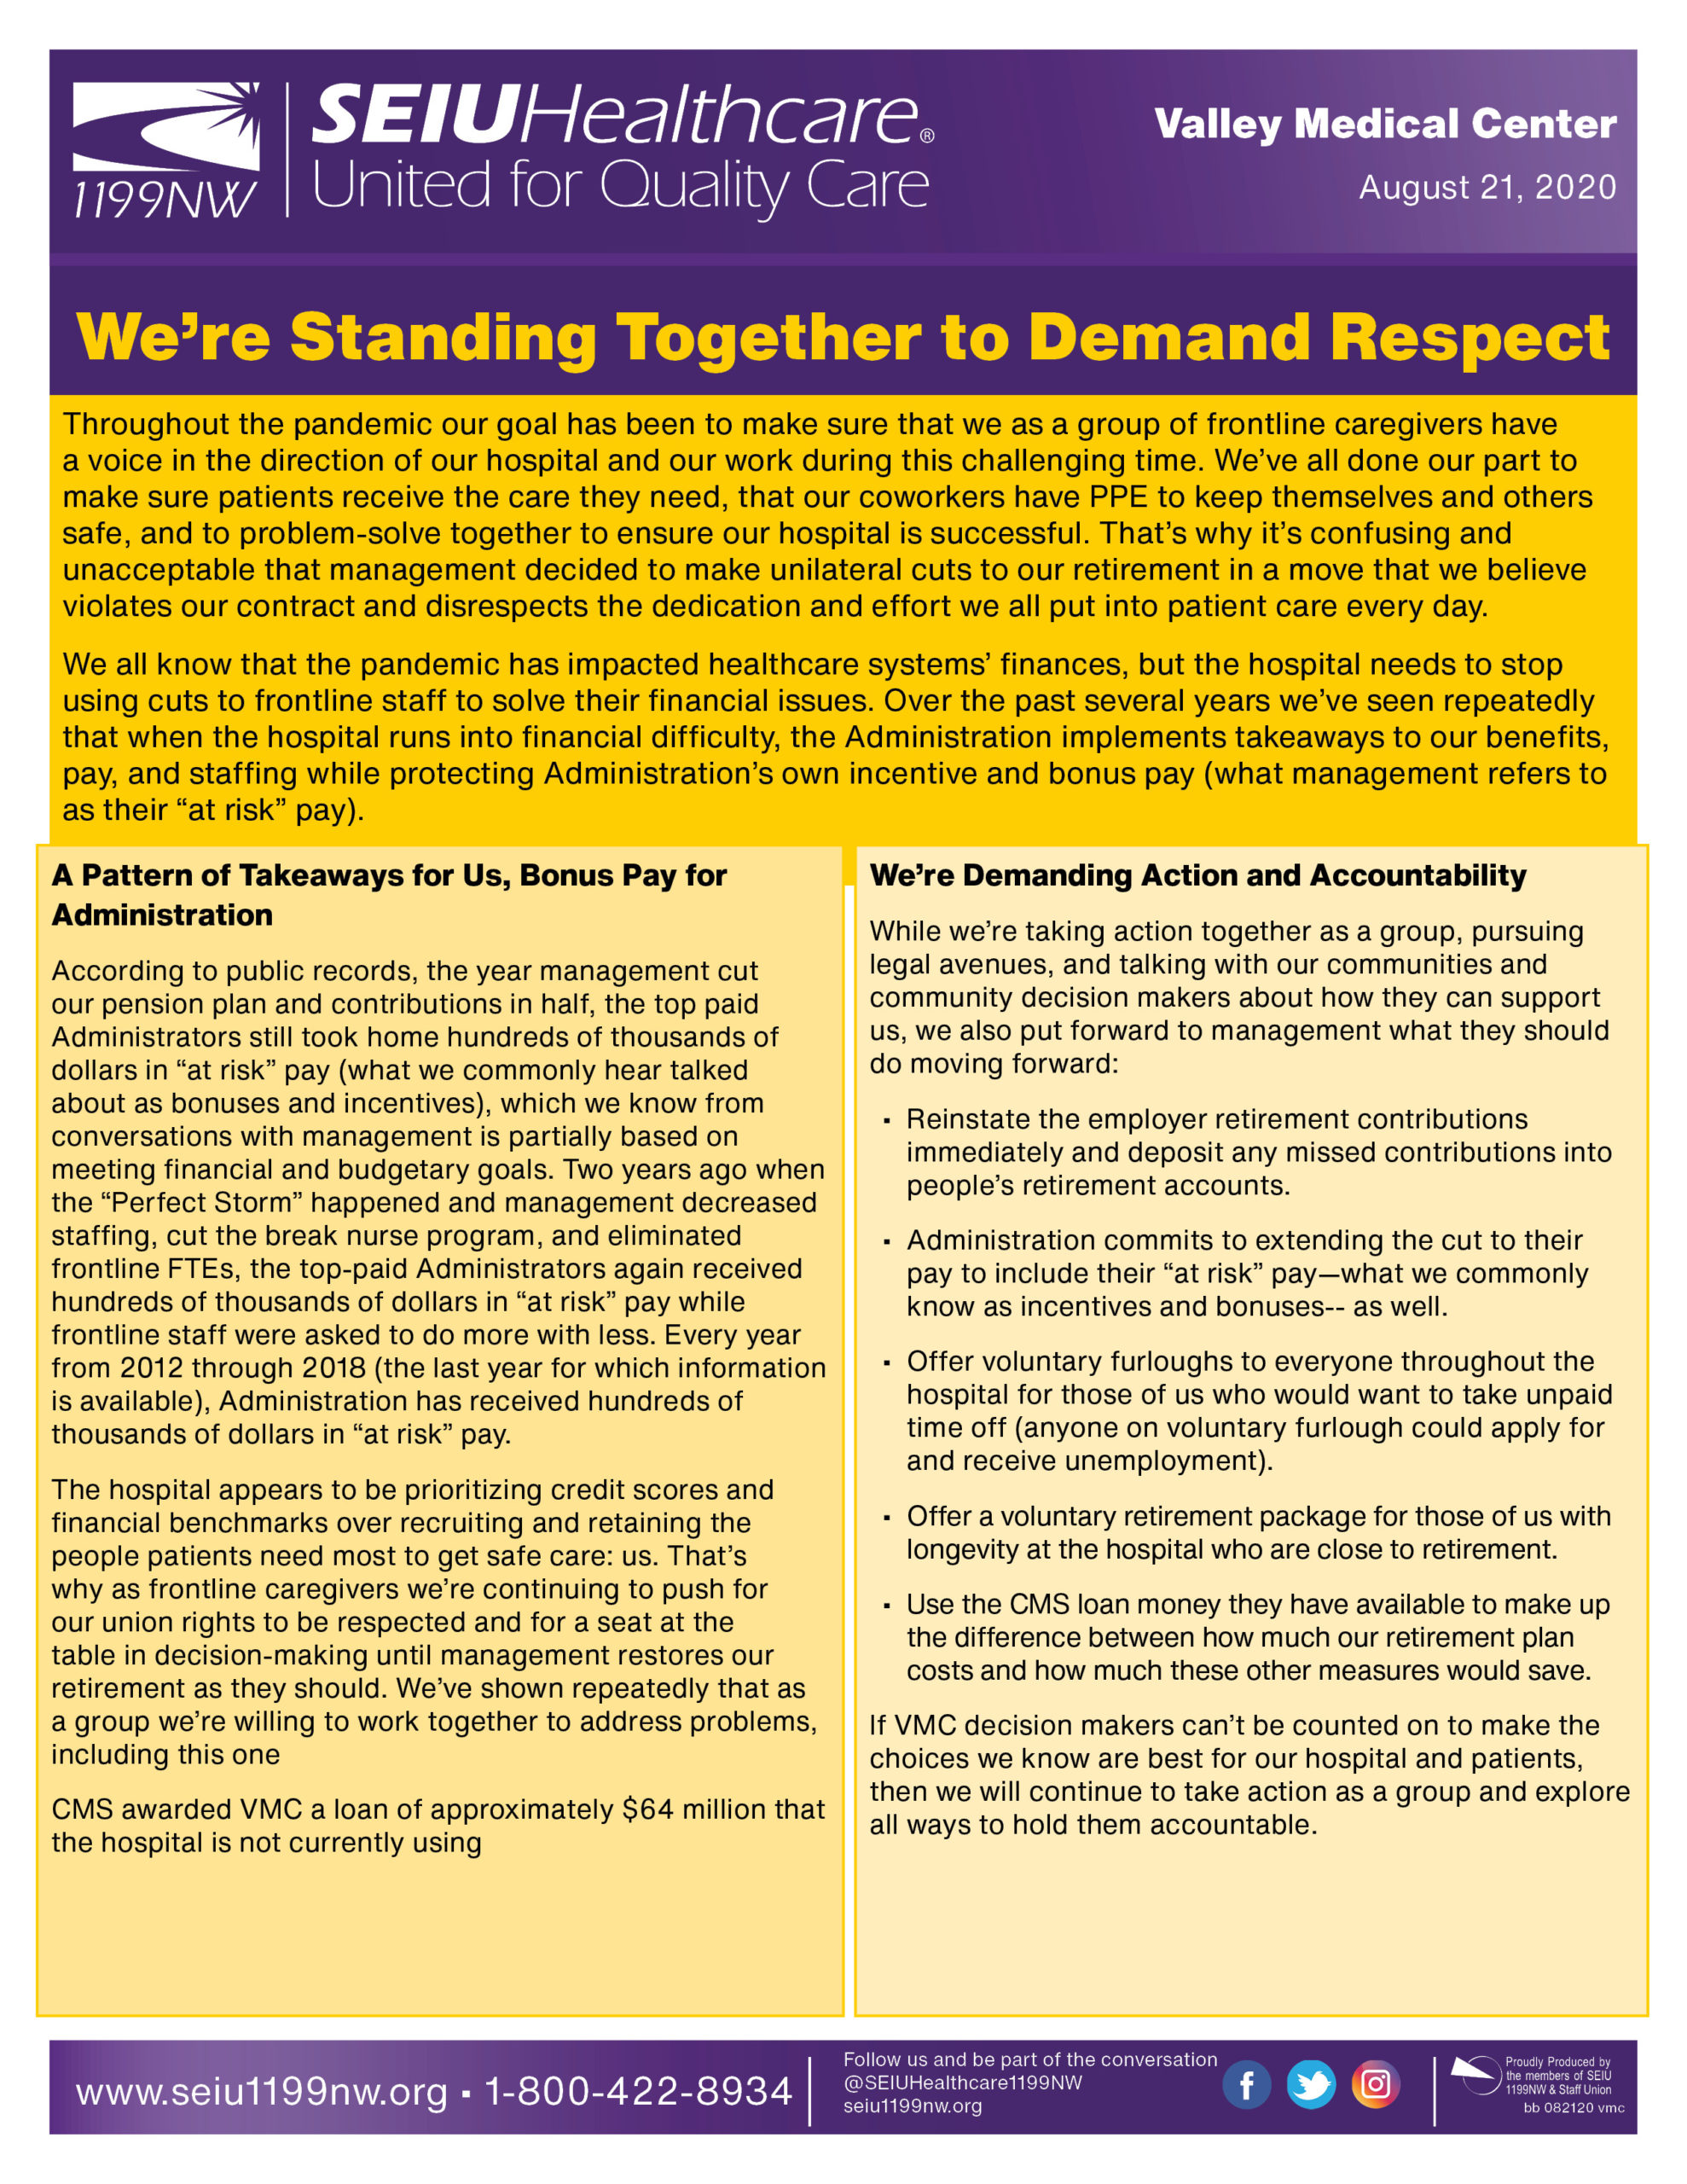 We’re Standing Together to Demand Respect